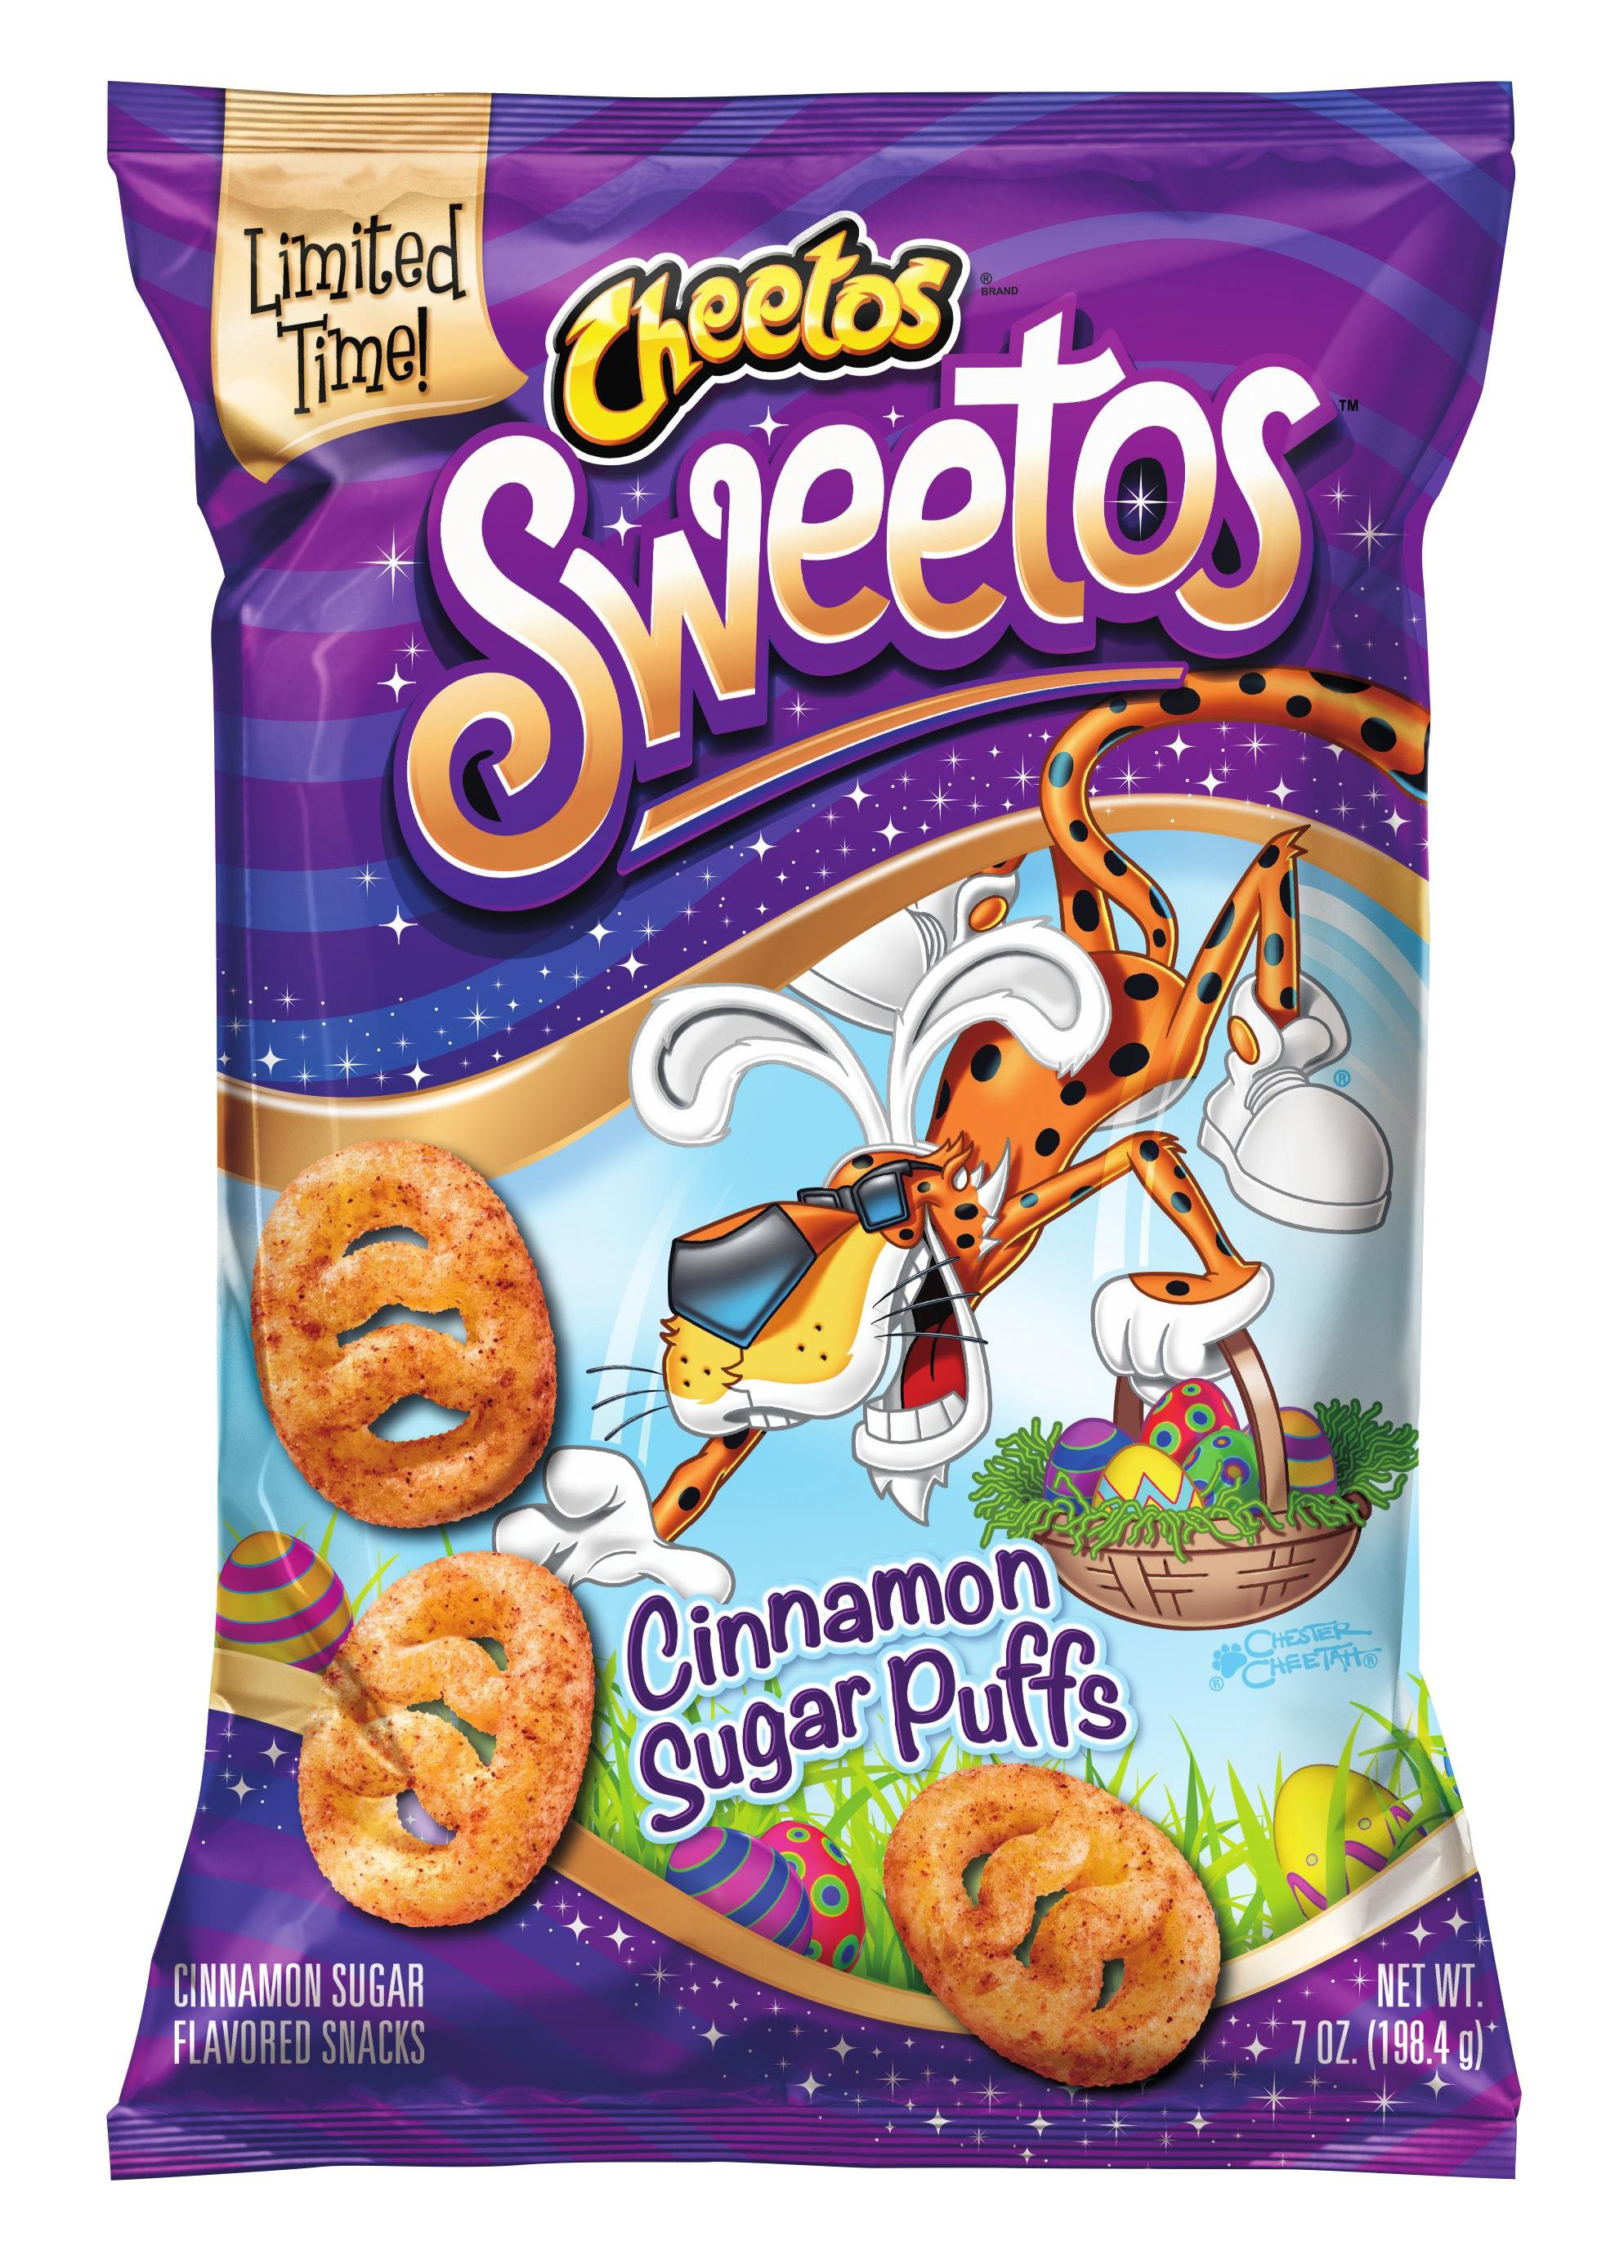 Cheetos to roll out Sweetos snacks